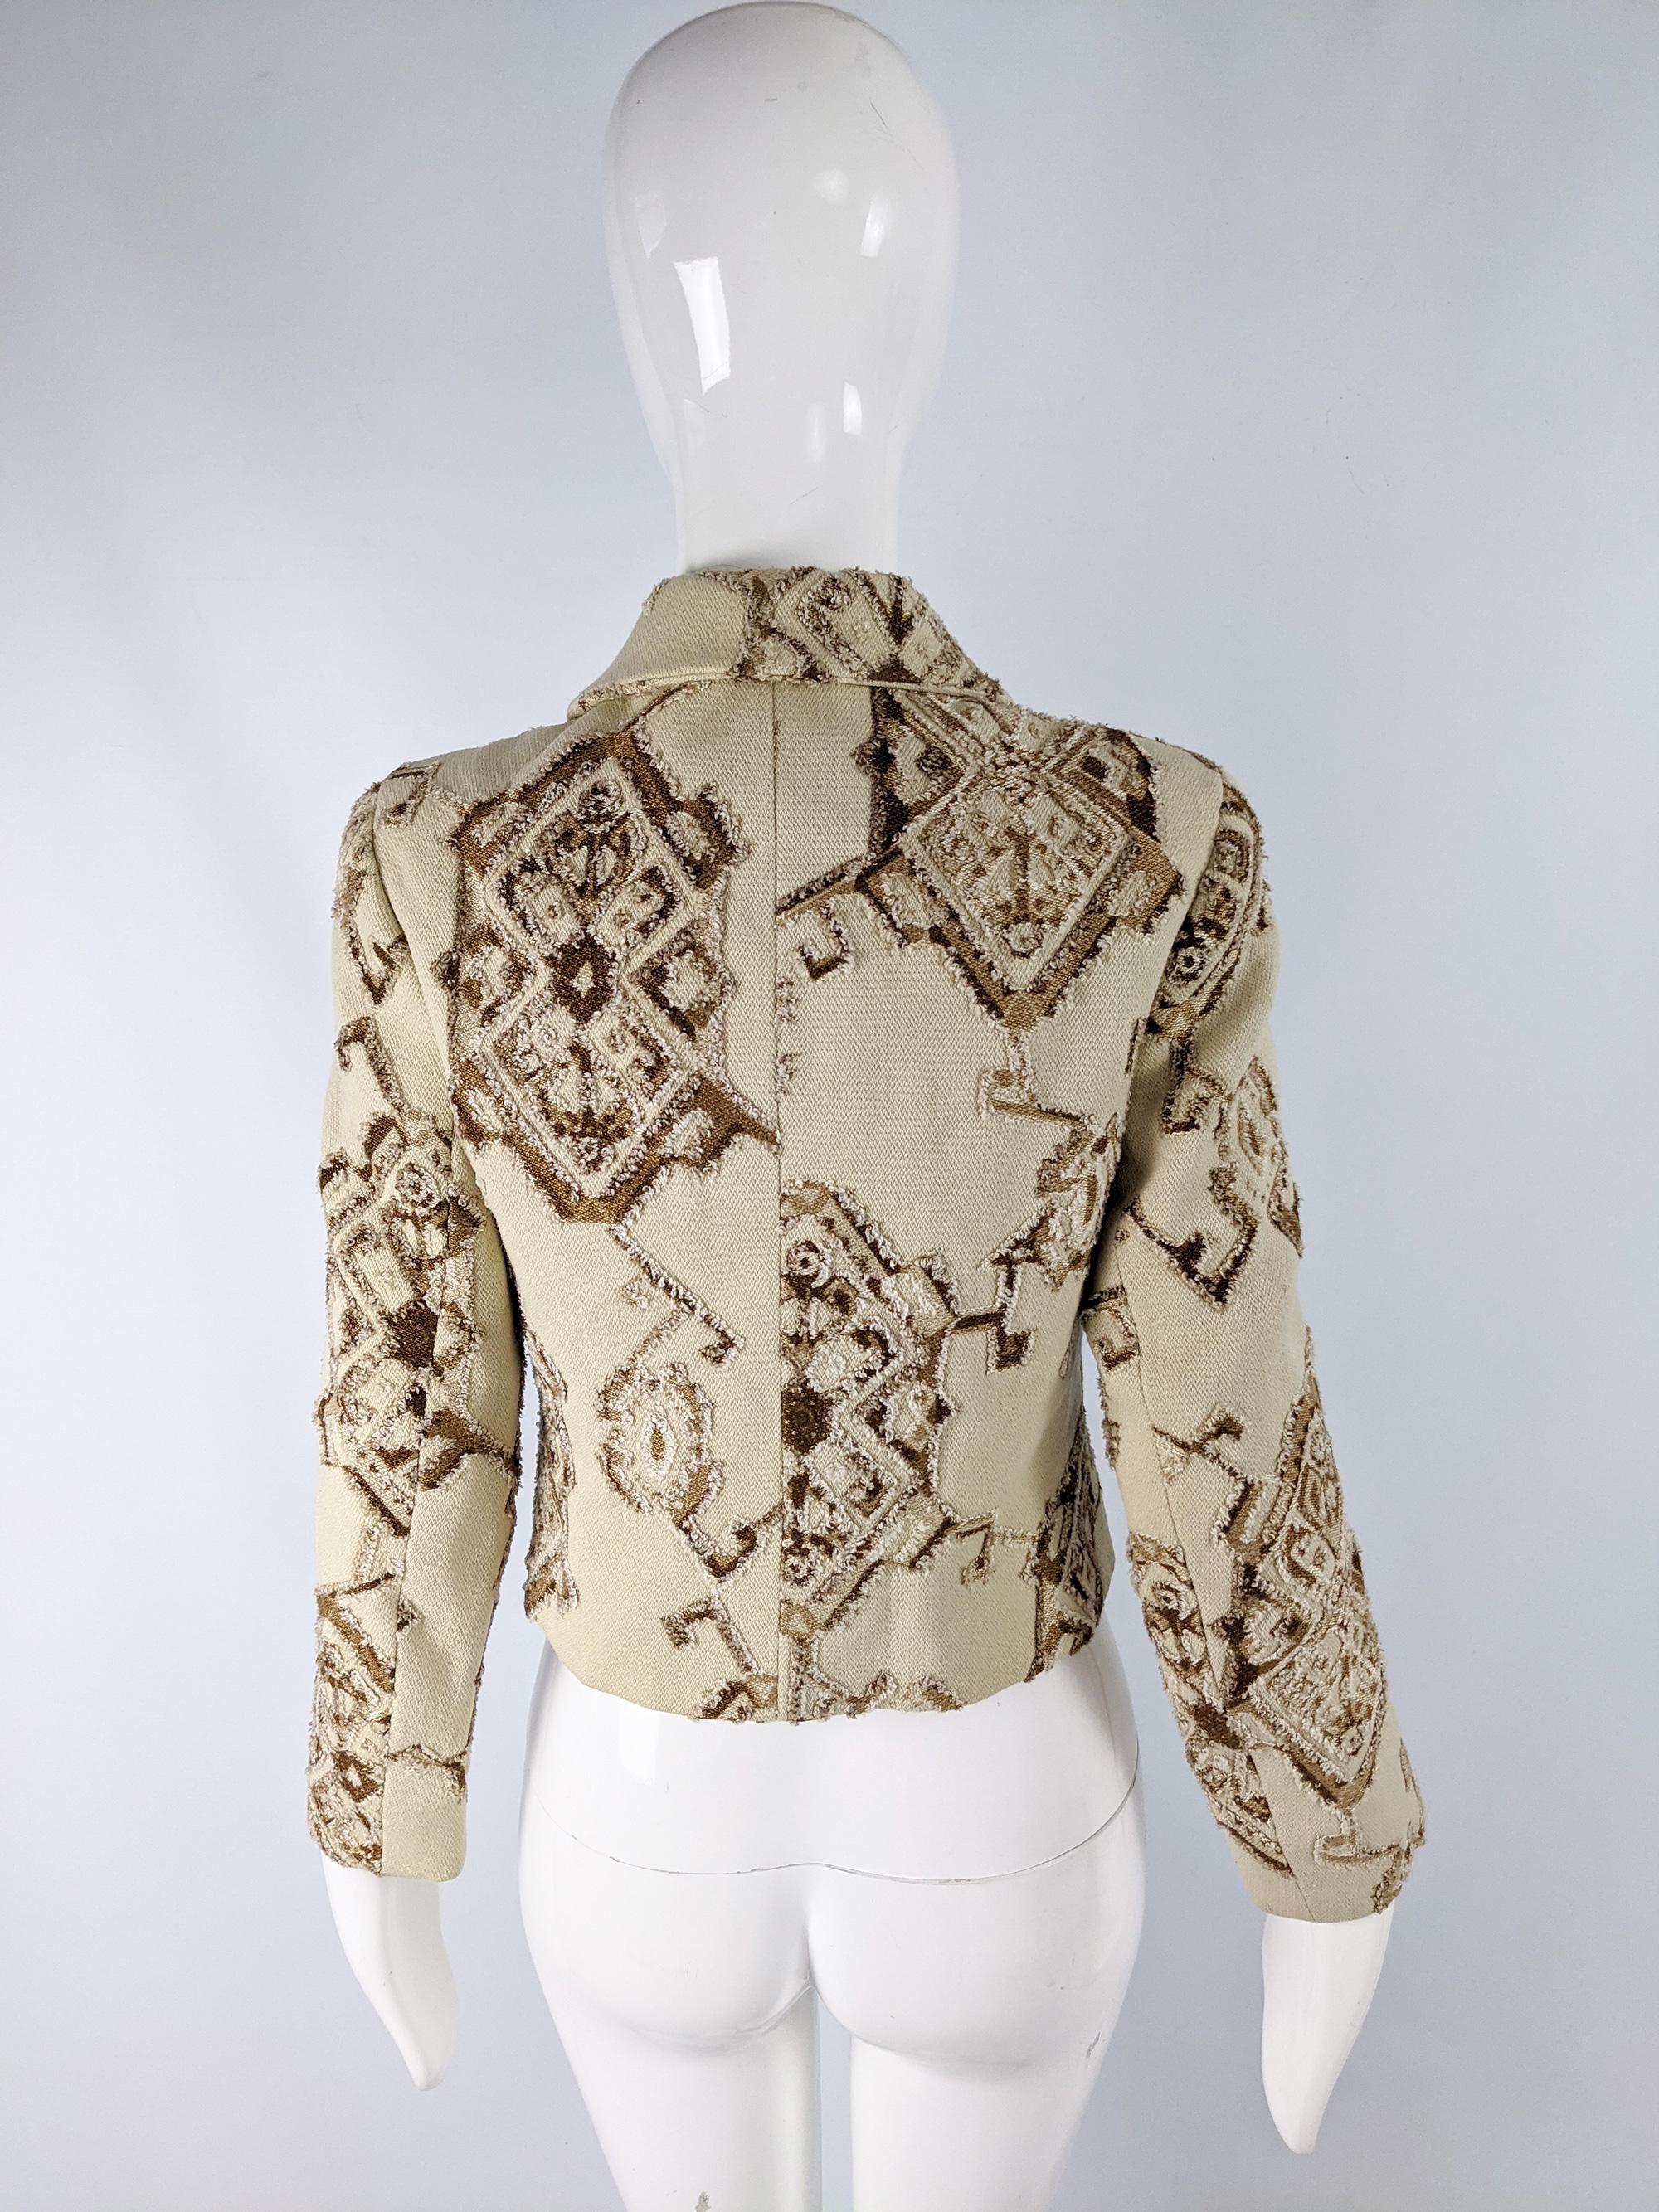 Women's Carven Paris Vintage Cream Wool Tapestry Brocade Womens Tailored Jacket, 1960s For Sale